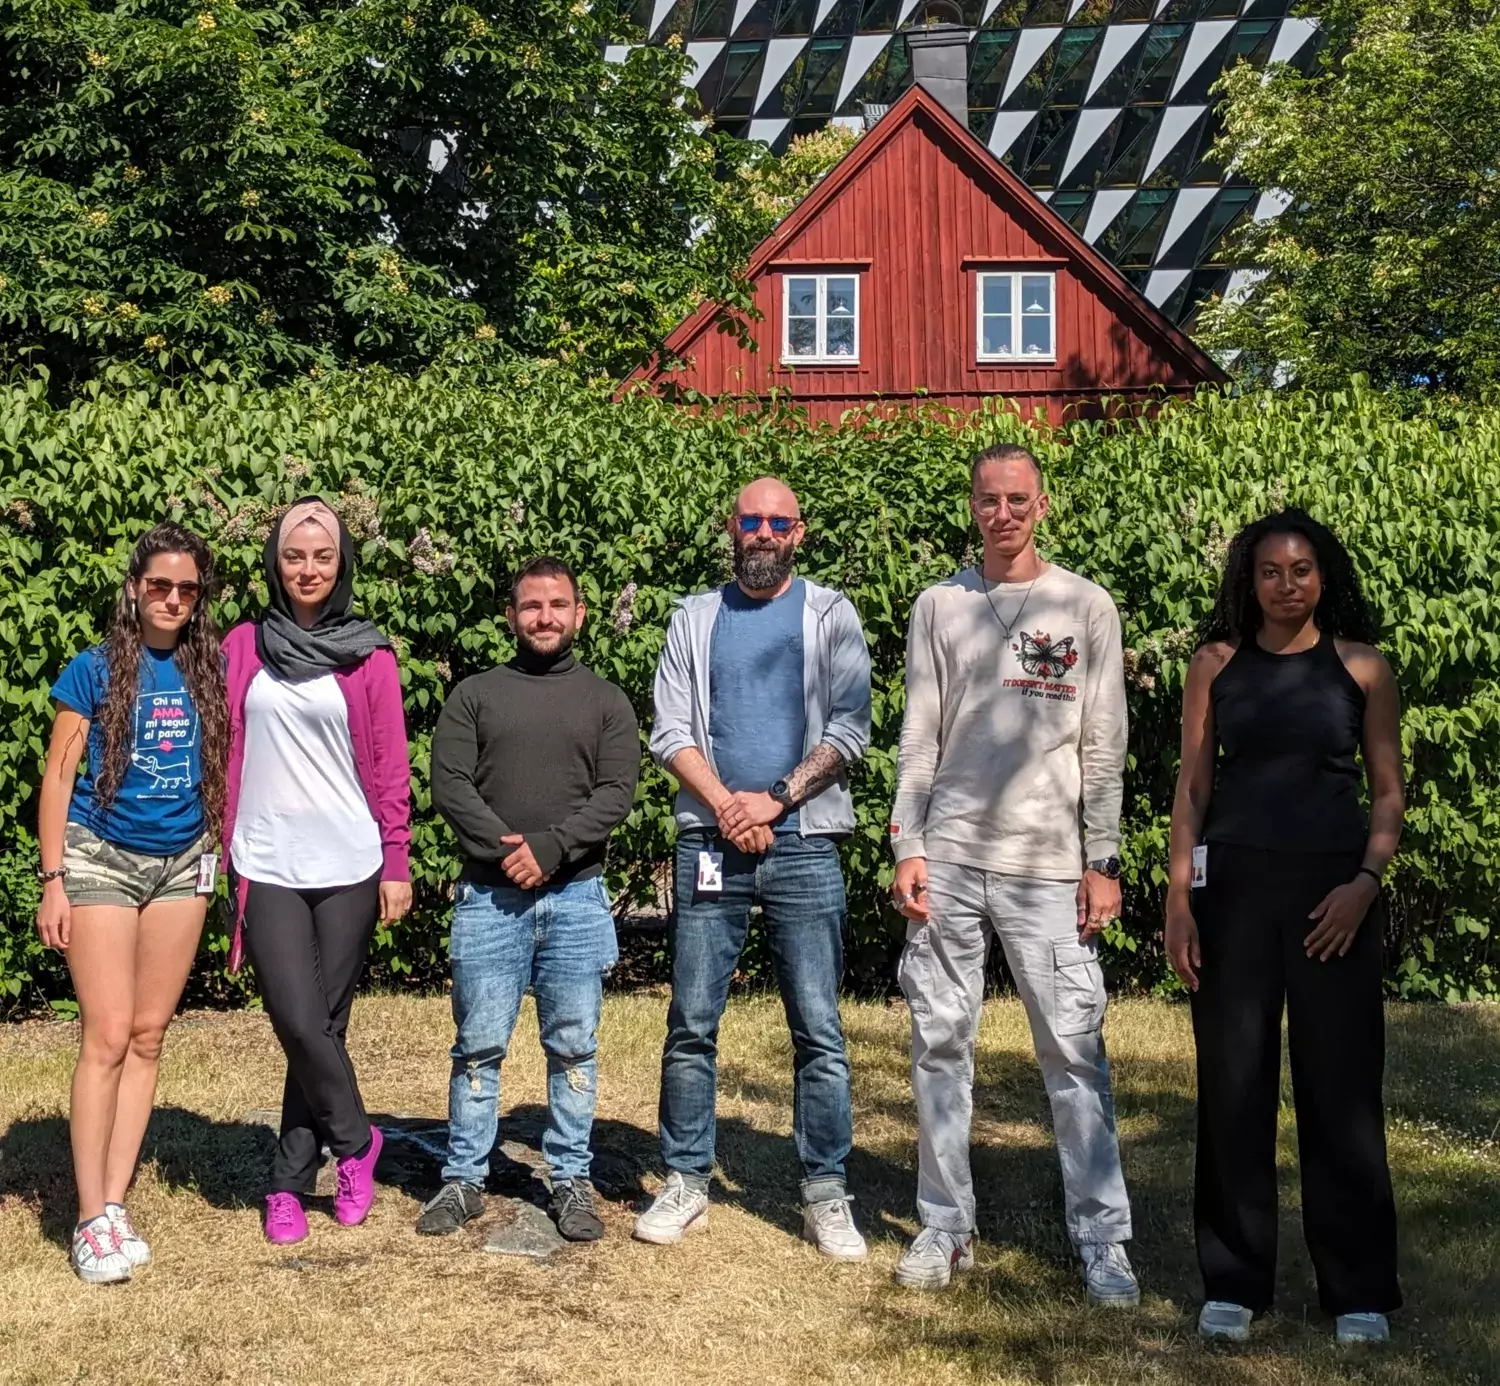 Group picture of lab members outside in front of the Aula, KI Campus Solna.